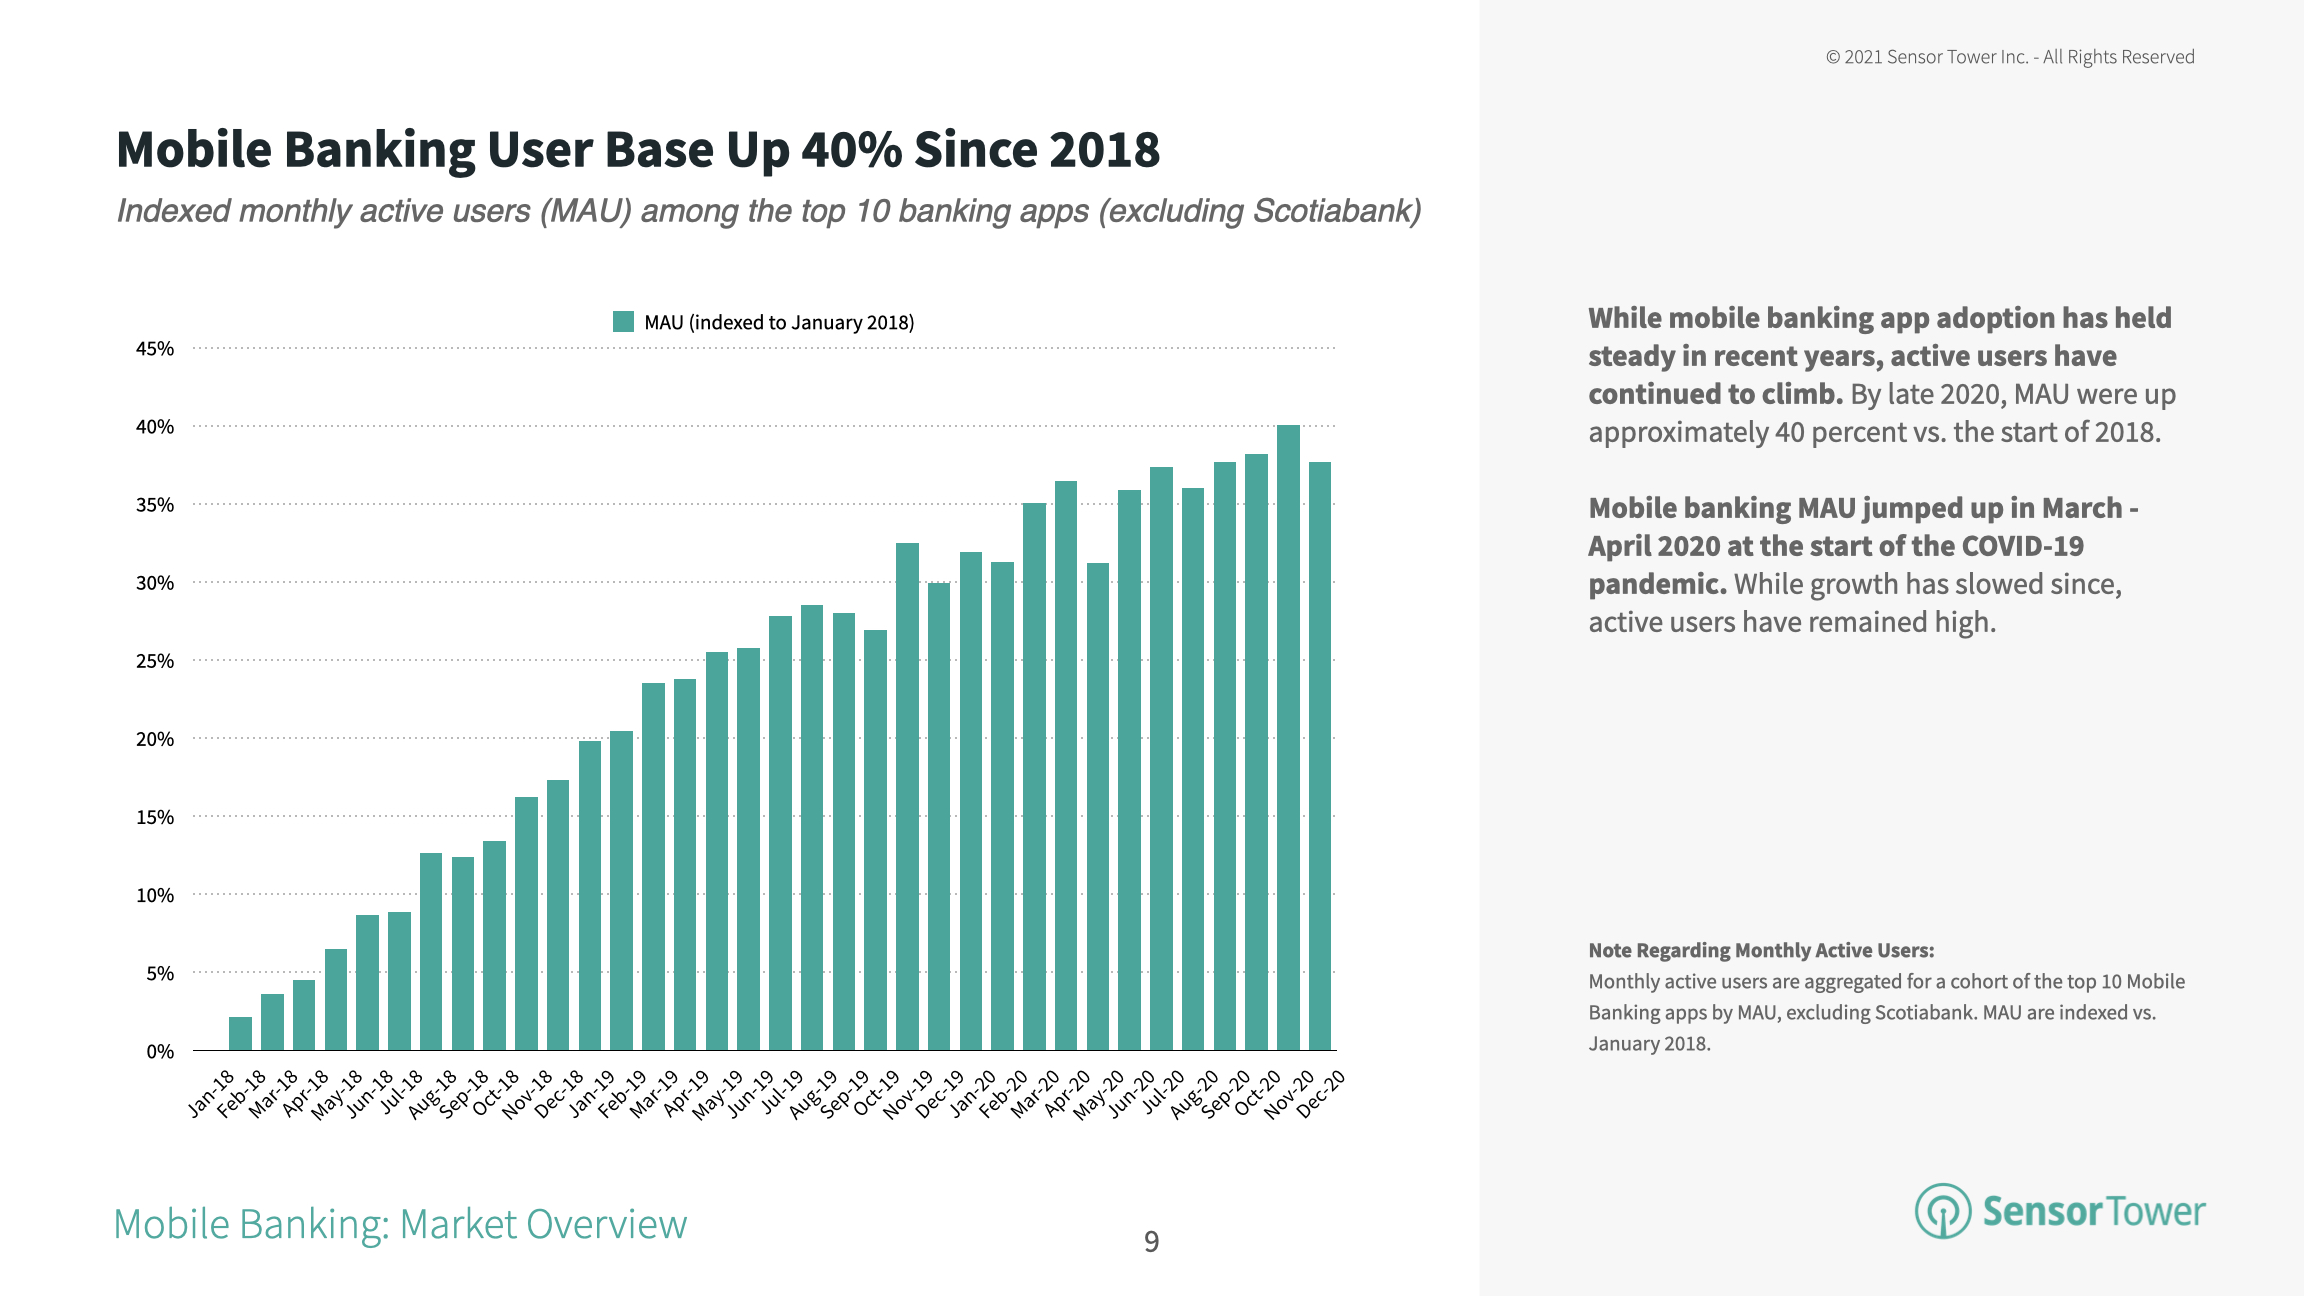 The monthly active users for the top 10 mobile banking apps were up 40 percent in late 2020 when compared to 2018